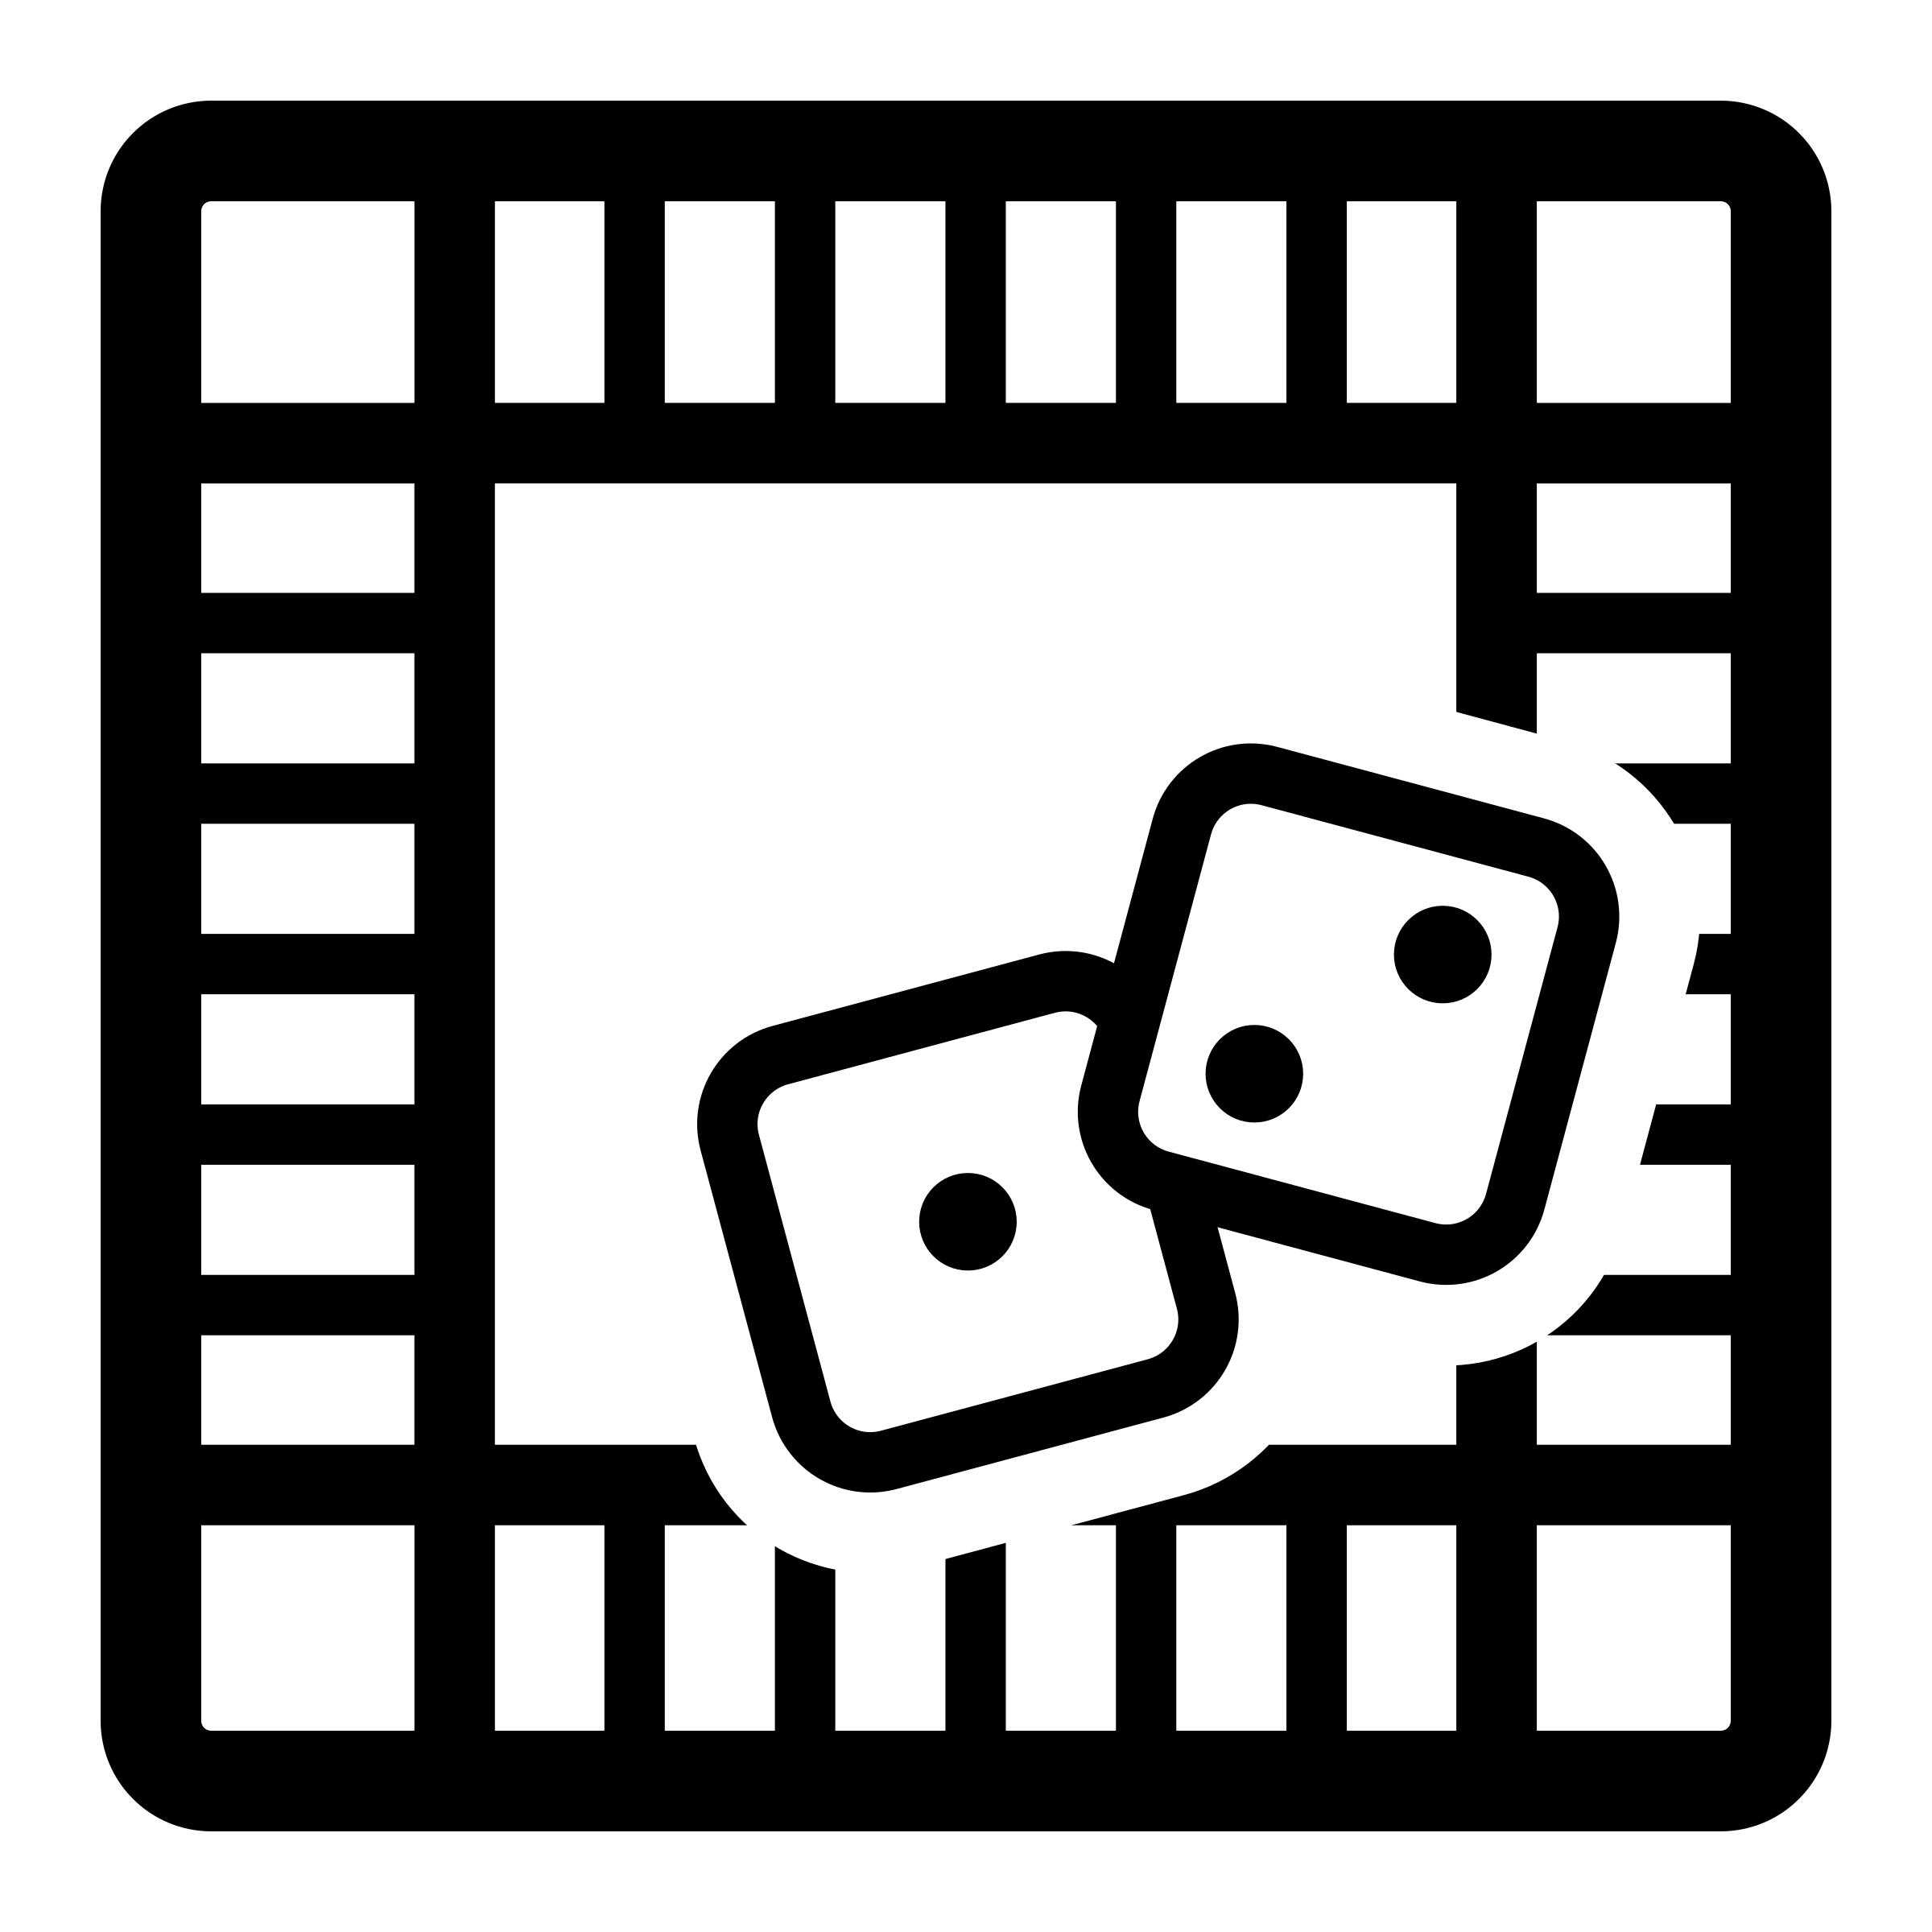 Board games clipart black and white.